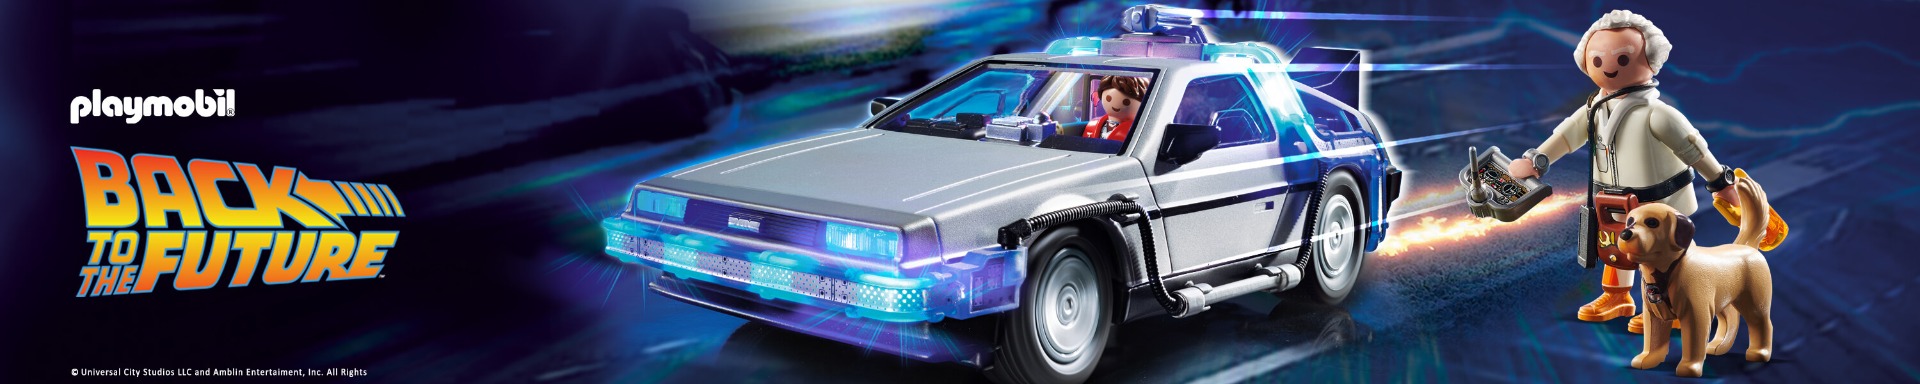 playmobil-back-to-the-future